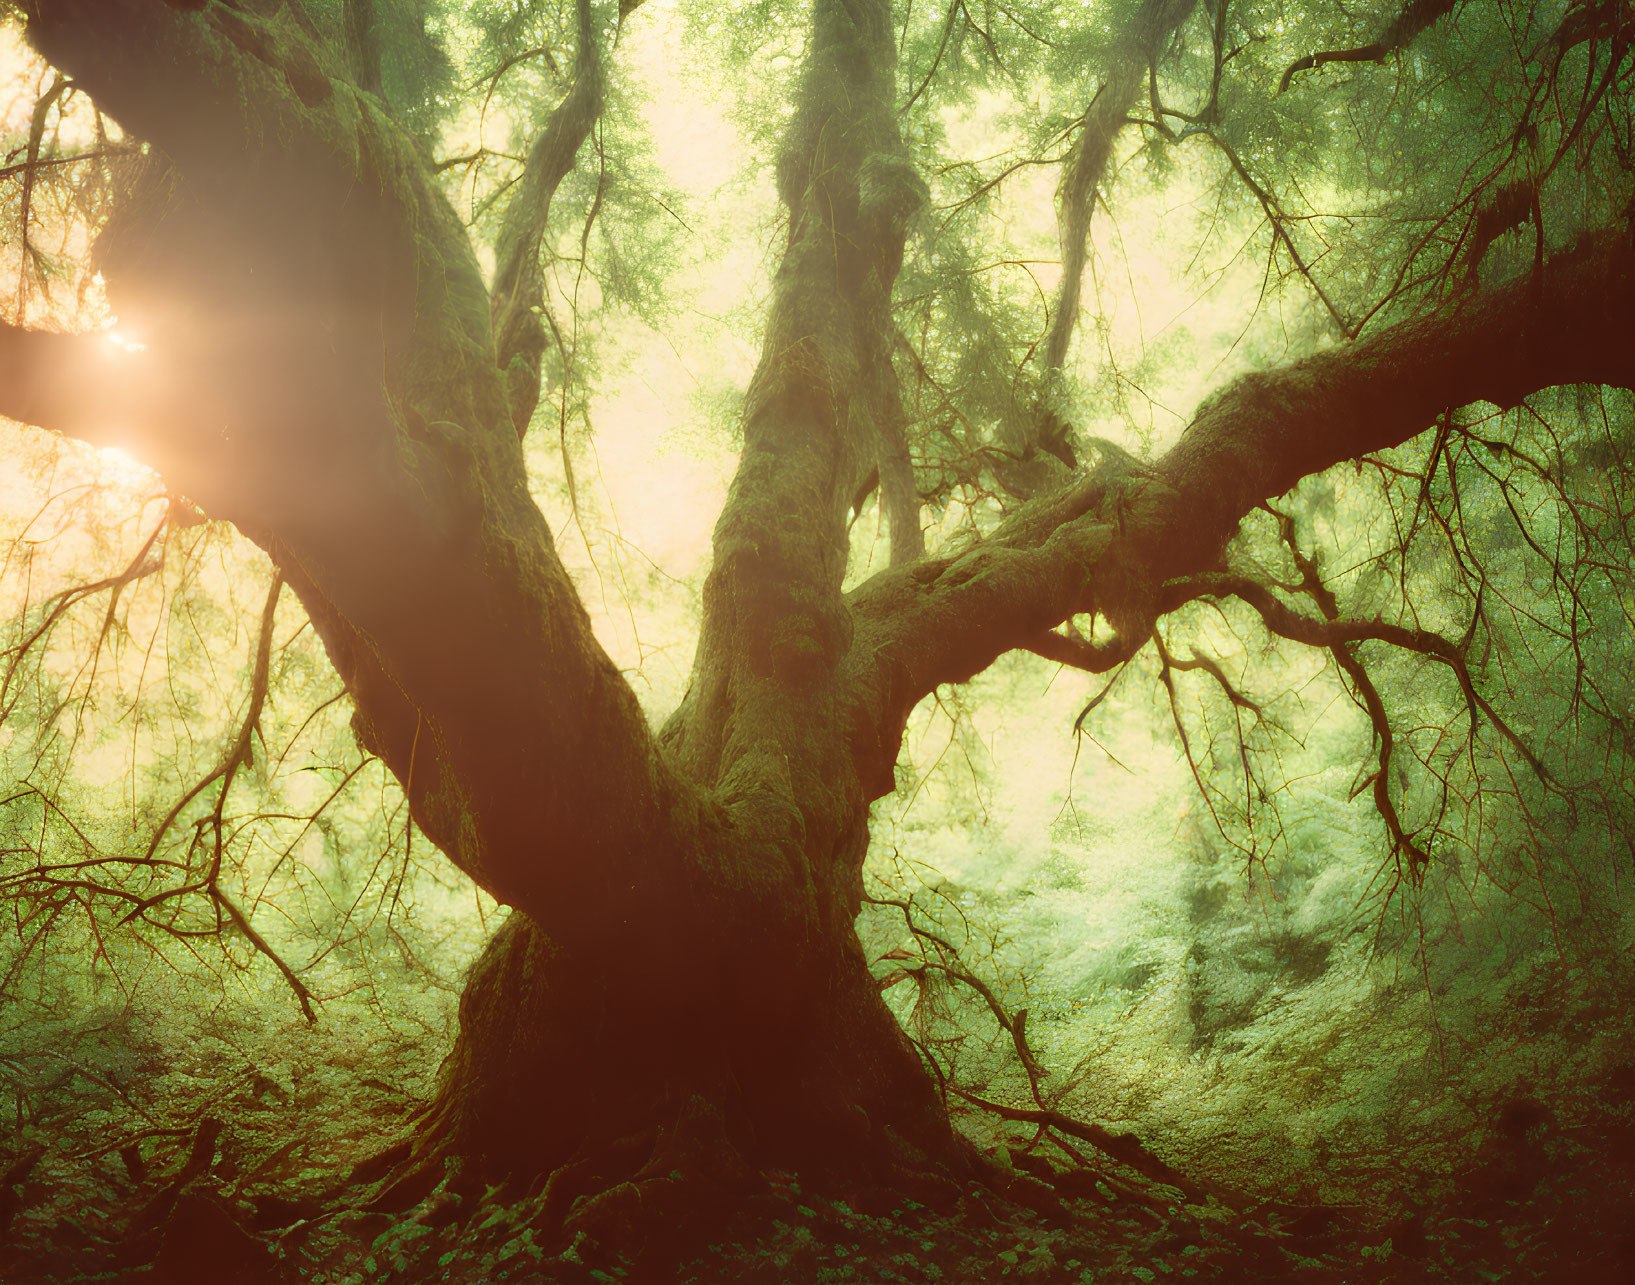 Sunlit mystical forest with ancient, sprawling tree